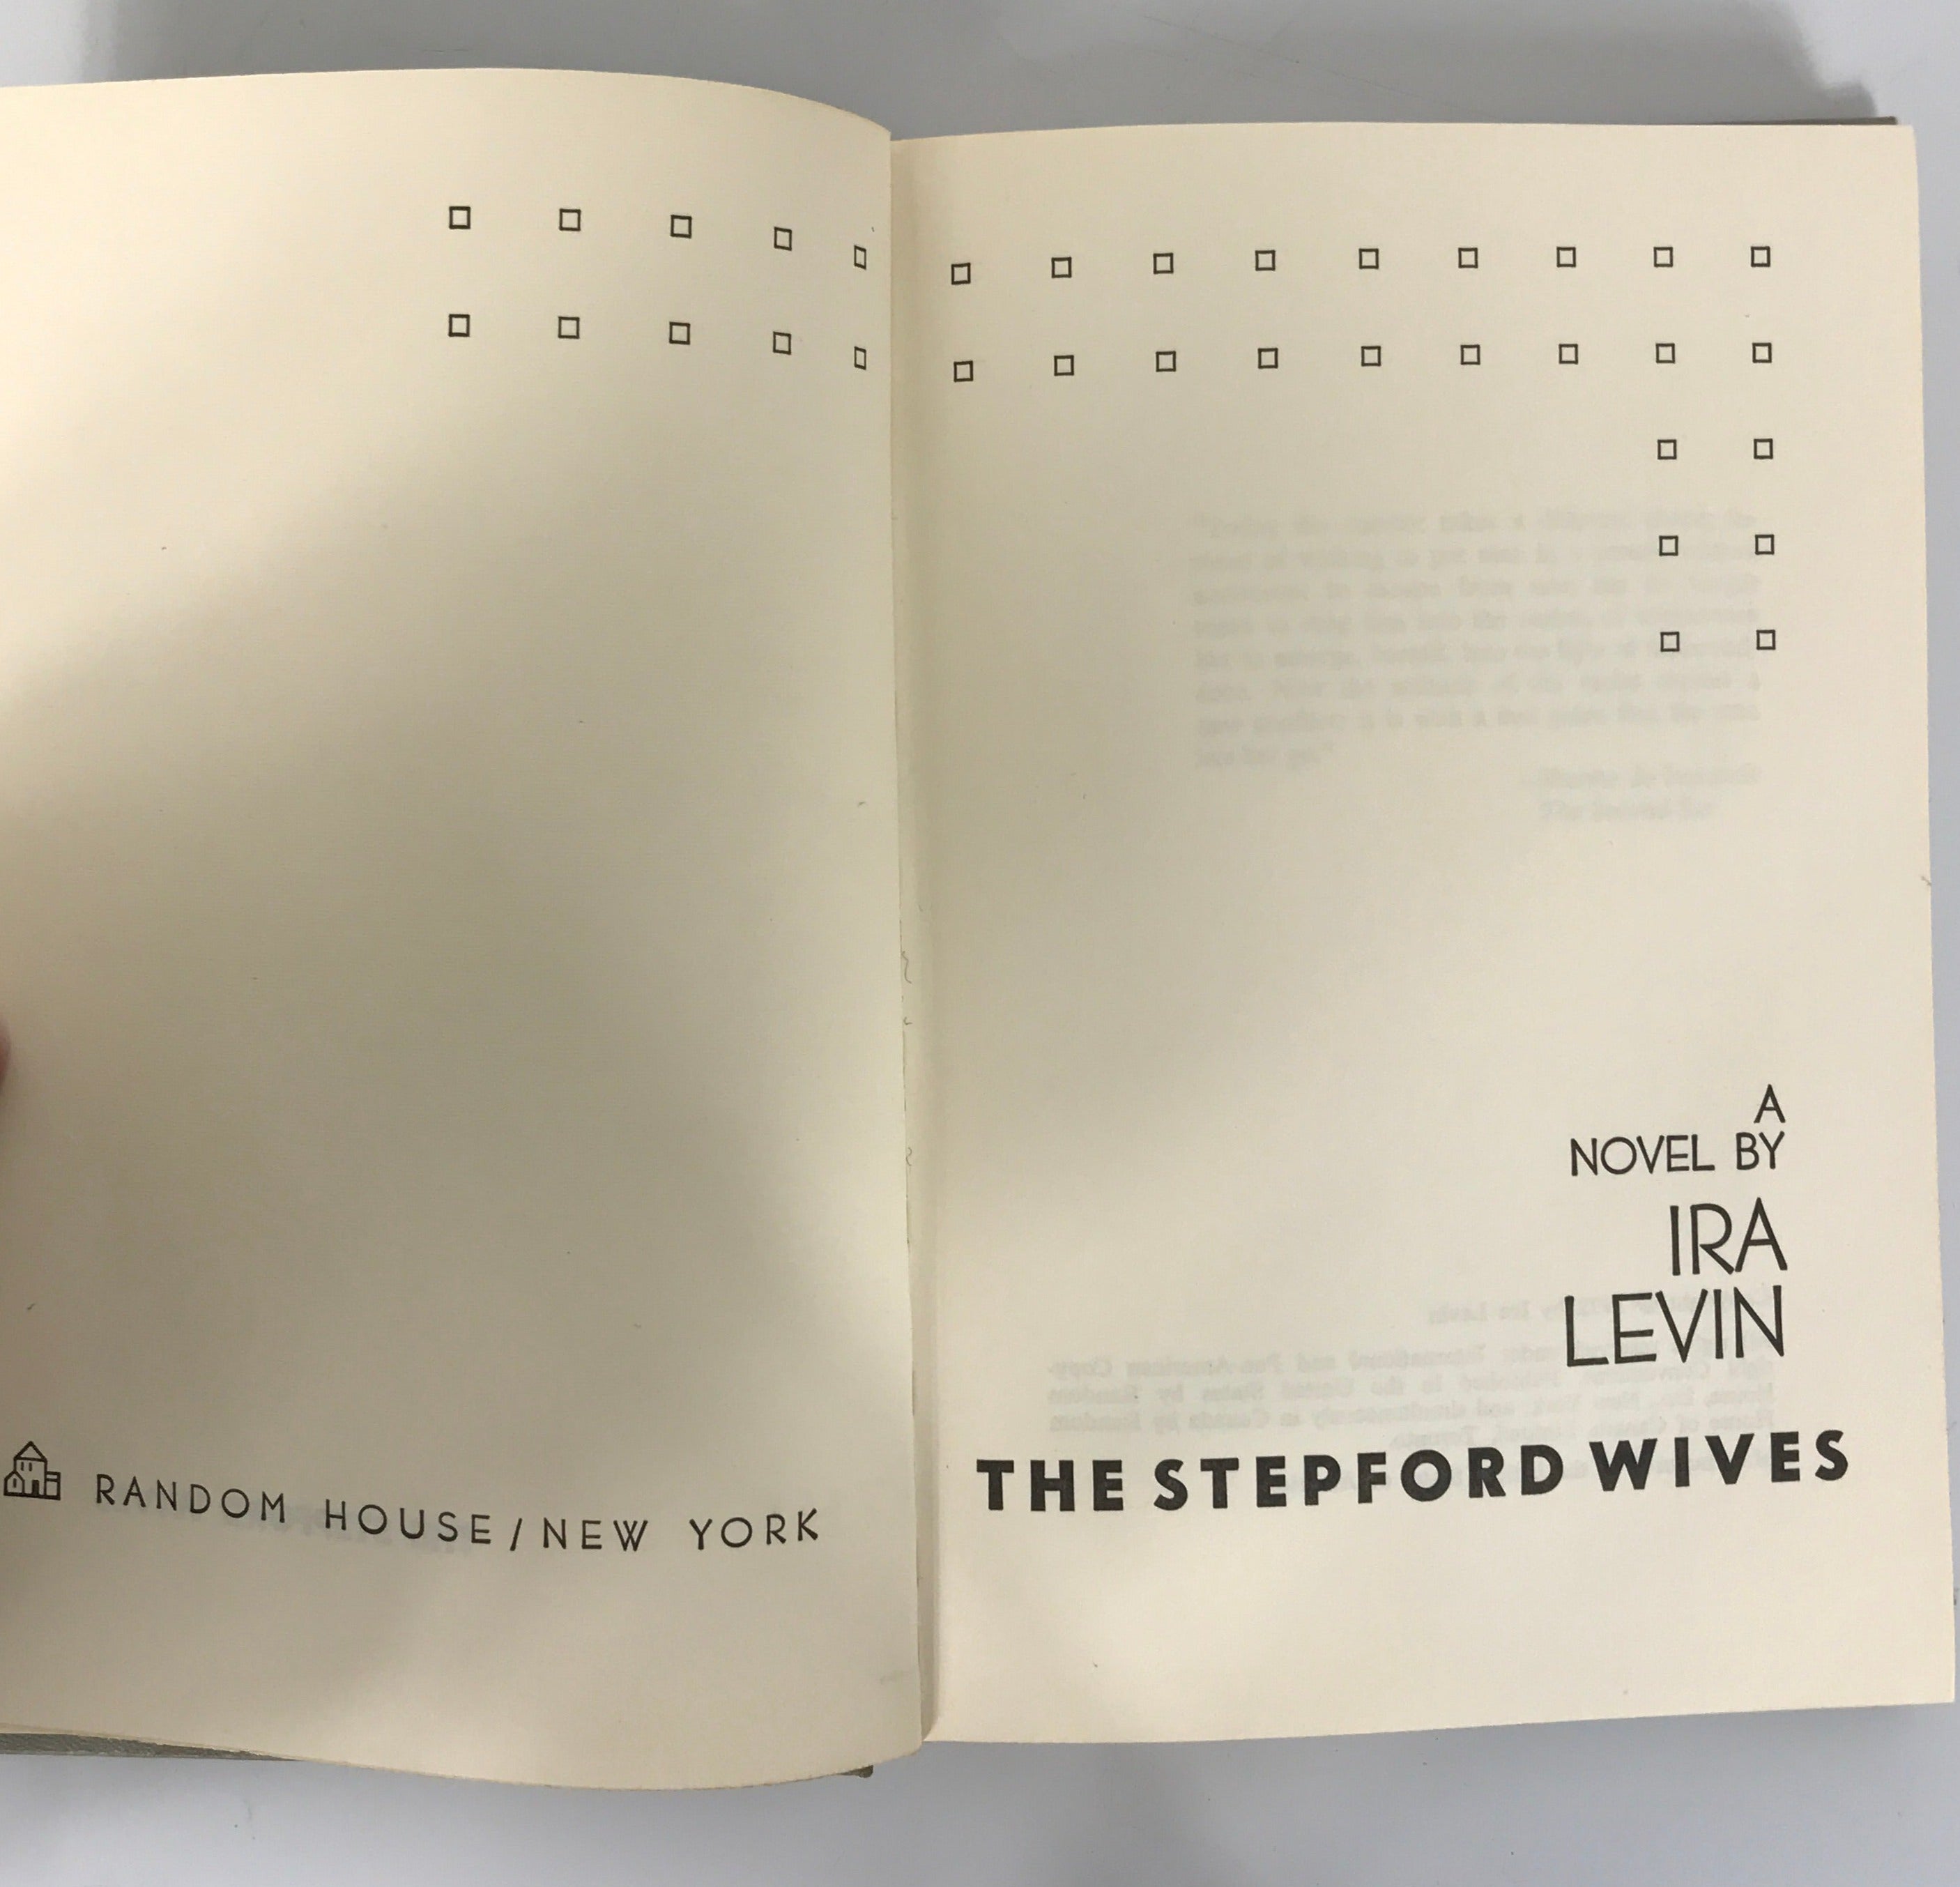 Lot of 2 Ira Levin Books: This Perfect Day 1970 HCDJ/The Stepford Wives 1972 HC